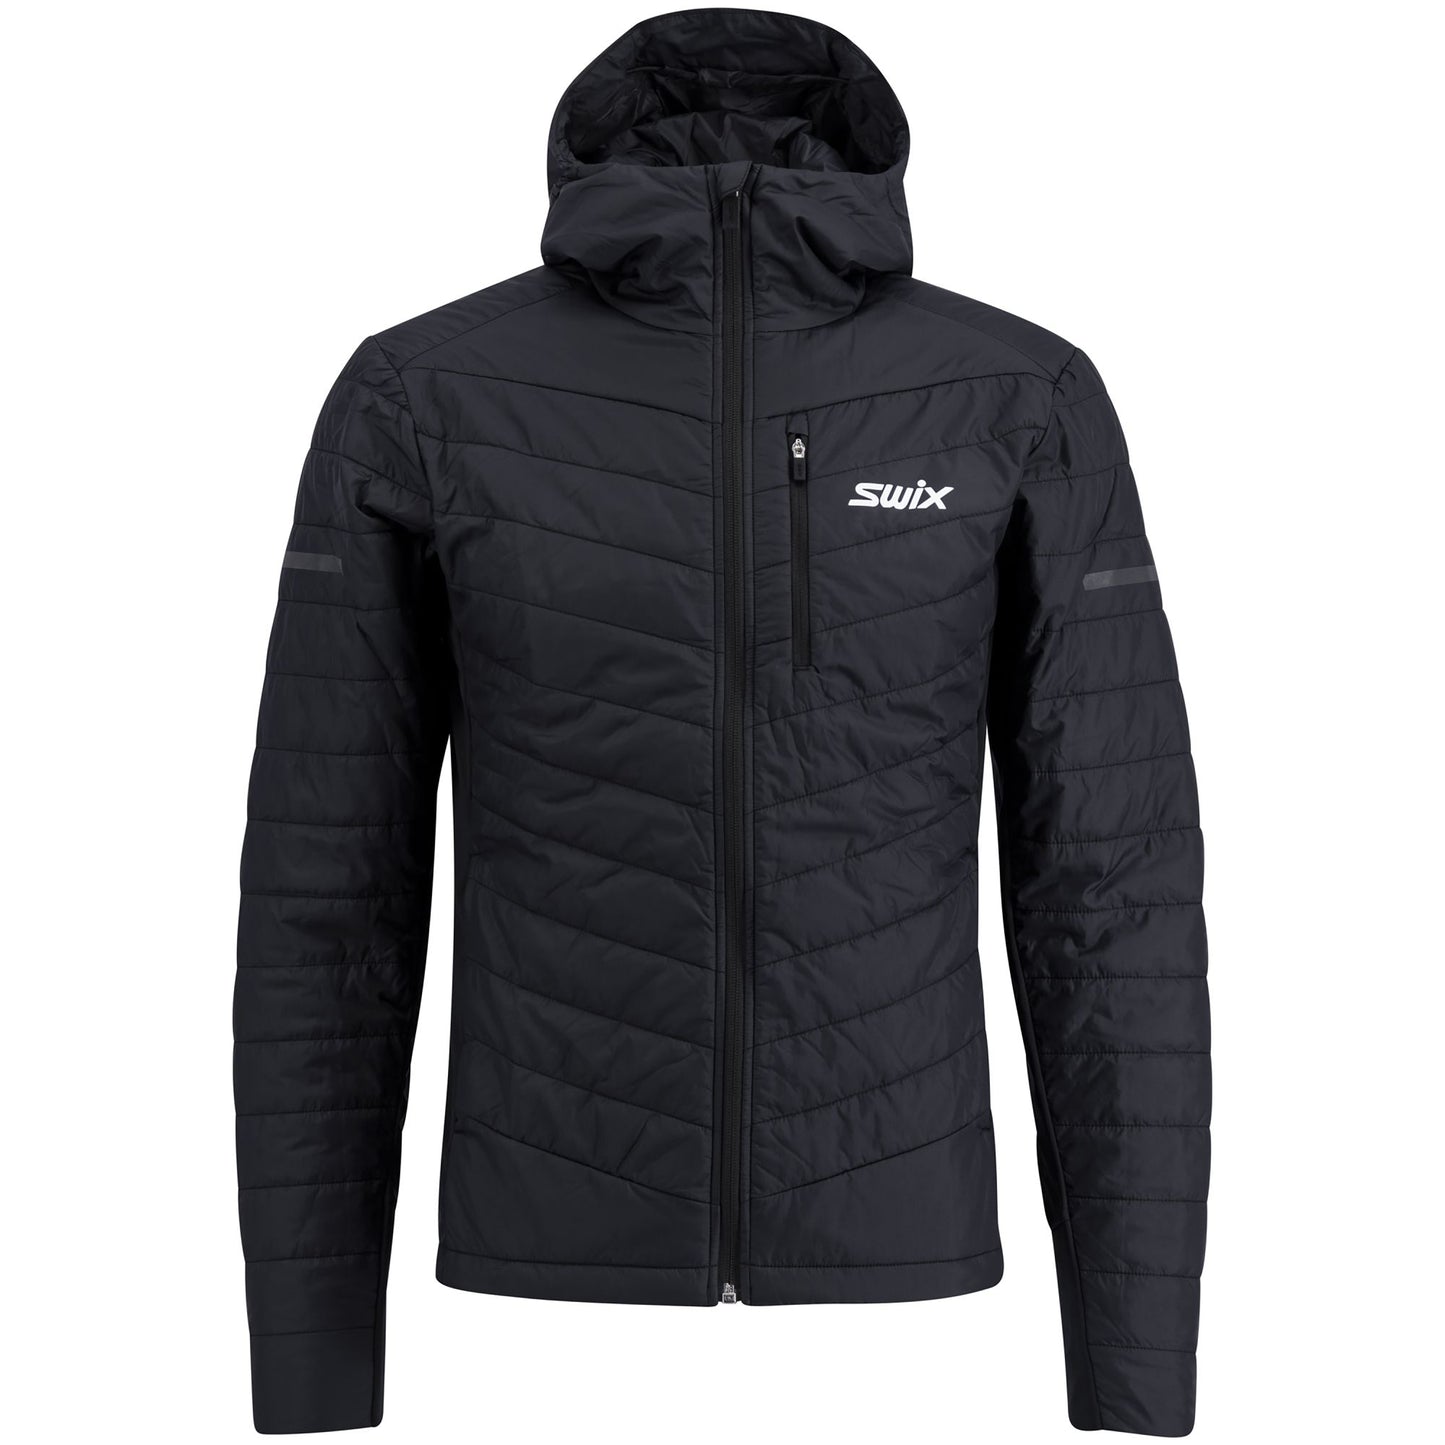 DYNAMIC - MEN'S INSULATED JACKET